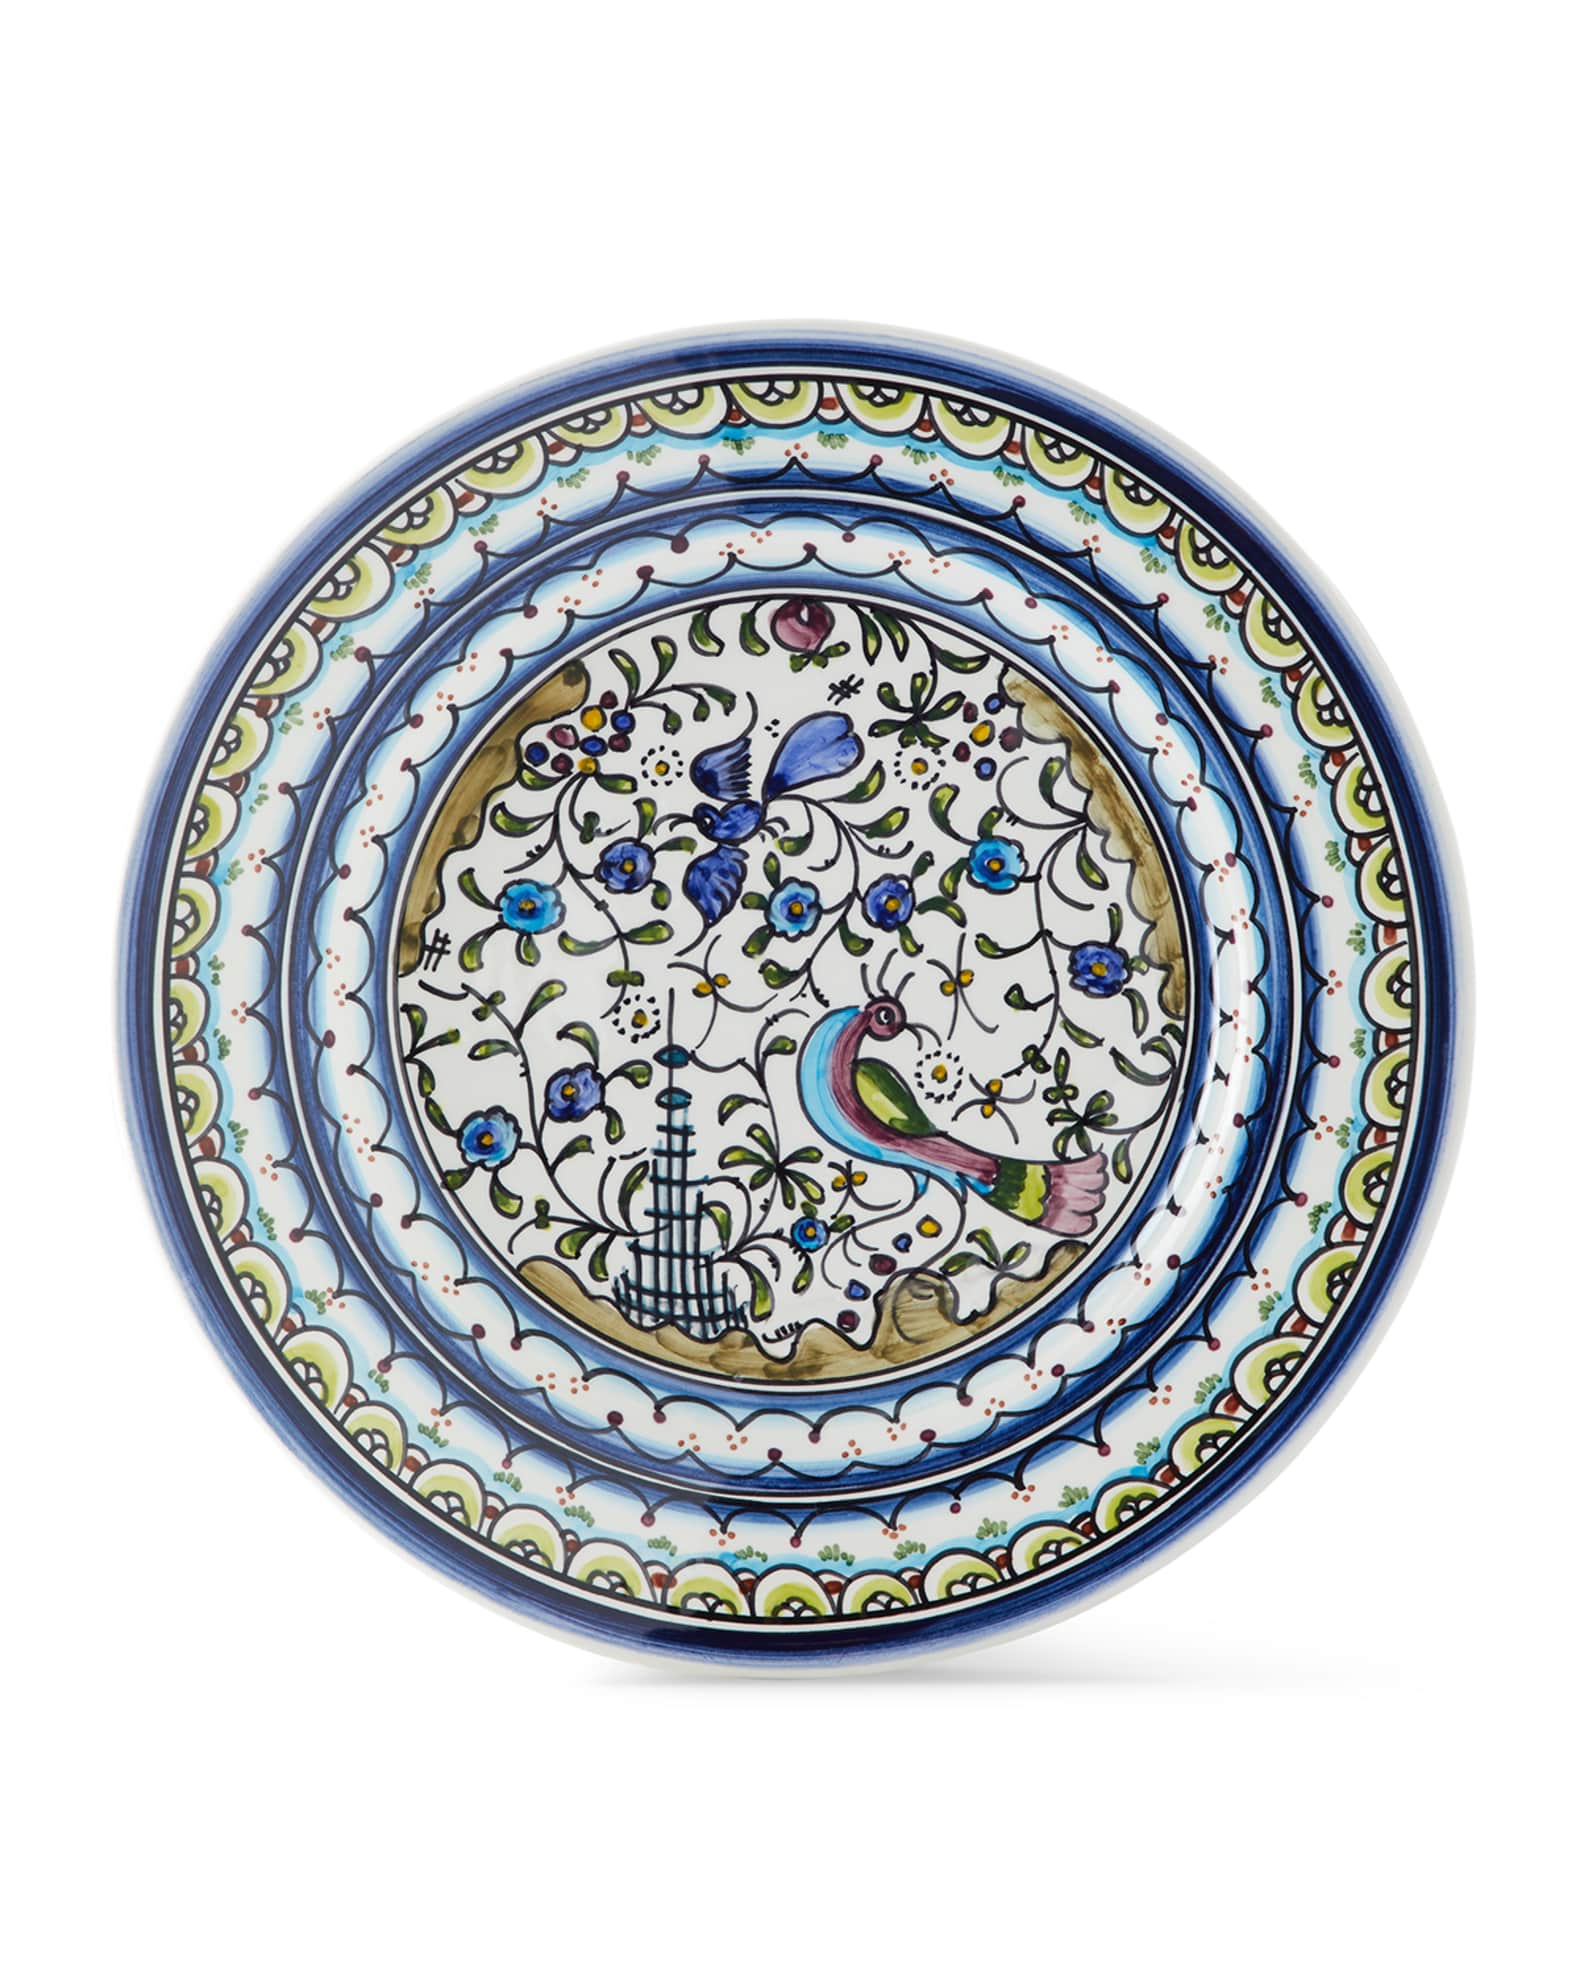 Neiman Marcus Pavoes Blue and Green Dinner Plates, Set of 4